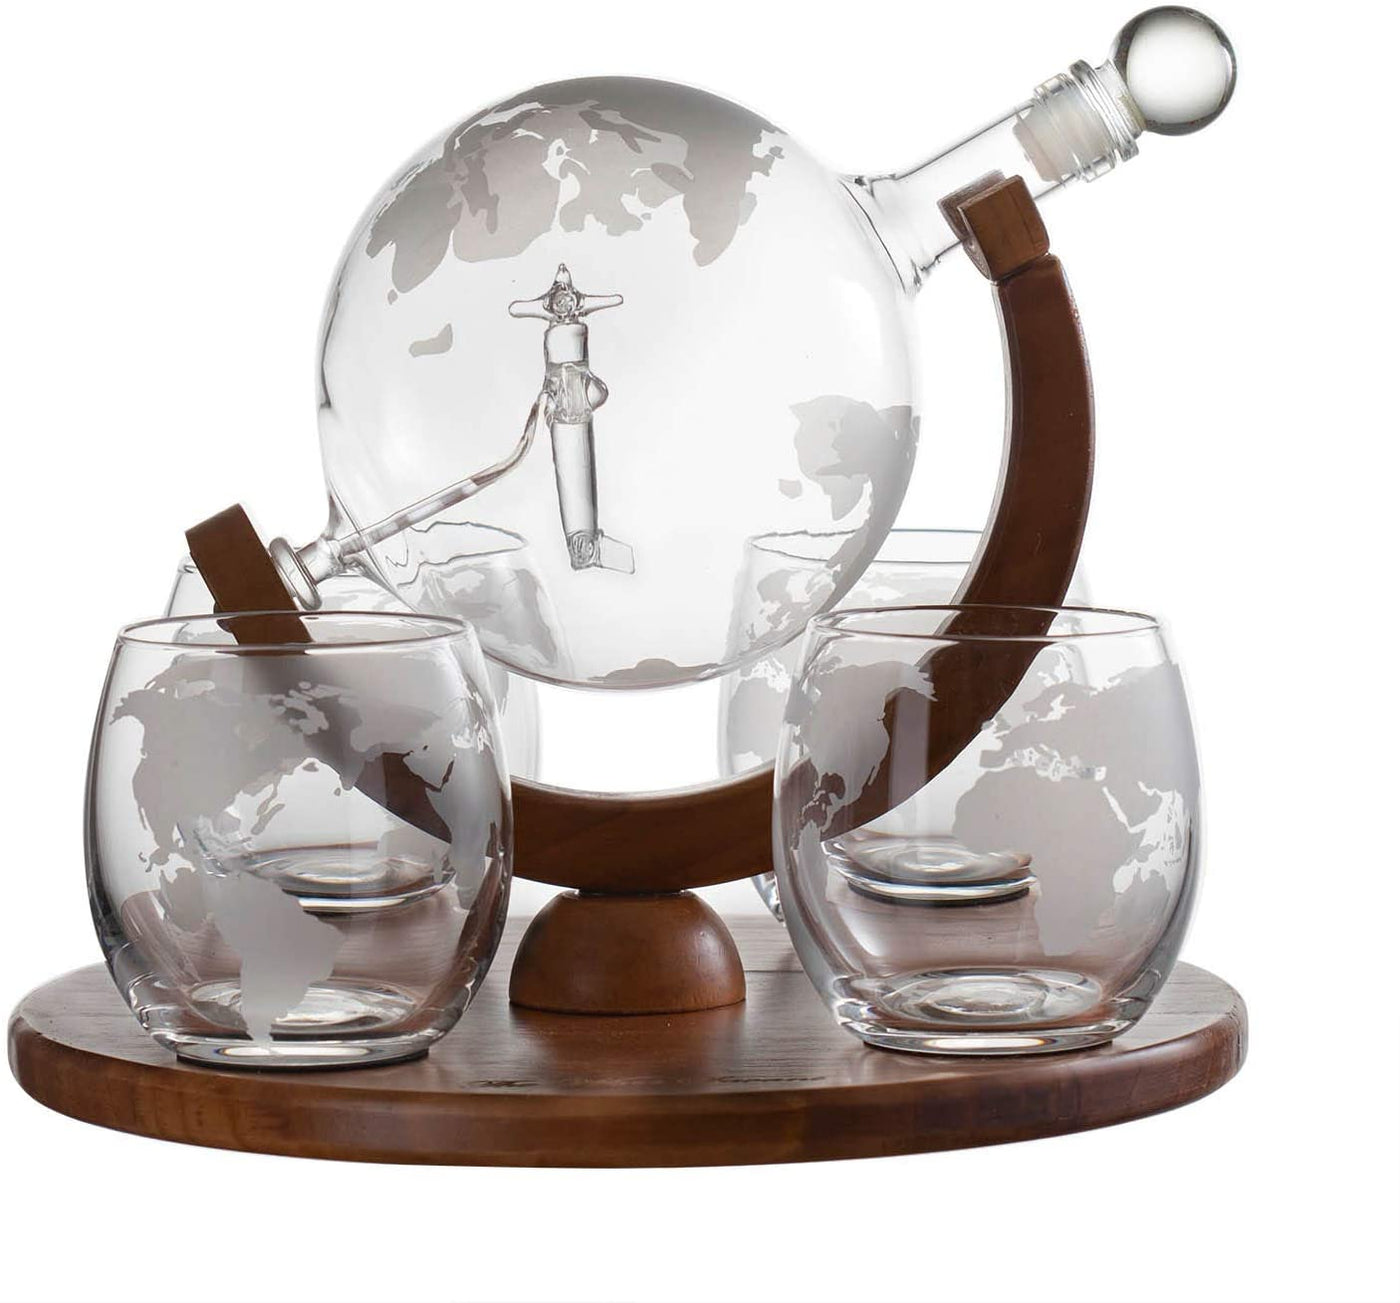 Etched World Decanter Whiskey Globe With Antique Airplane Inside - Includes Whiskey Stones and 4 World Map Glasses